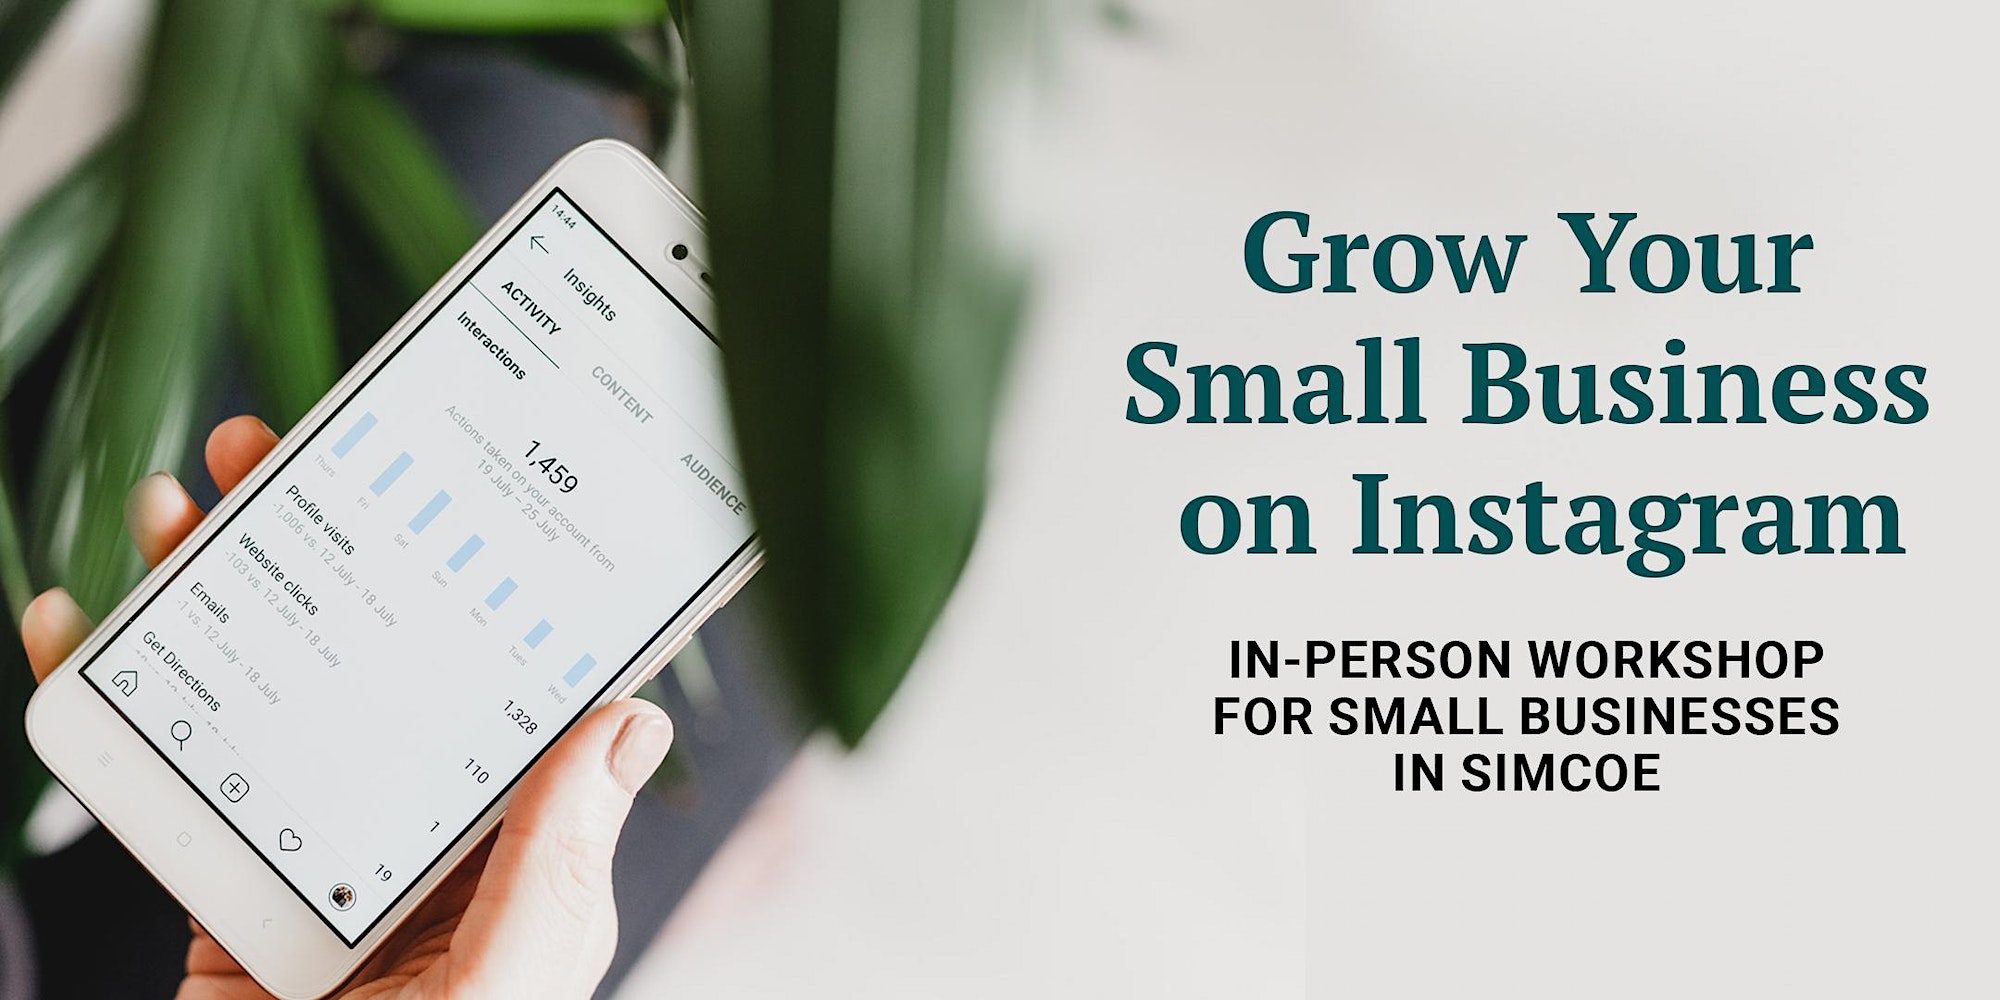 Grow your small business on Instagram: In-person workshop for small businesses in Simcoe.